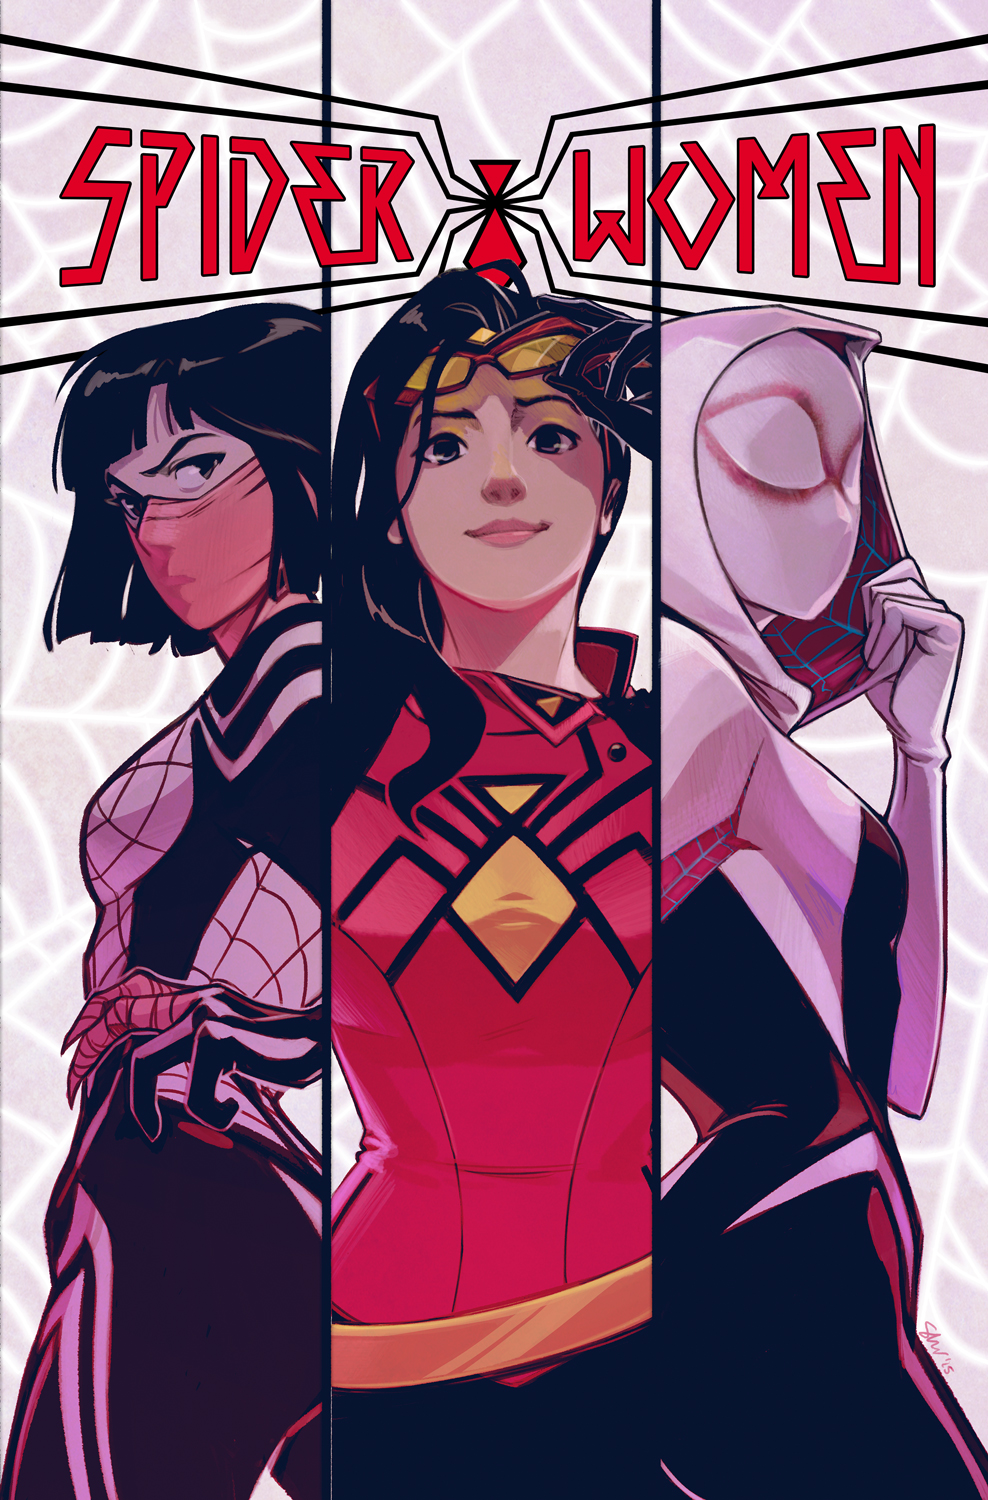 Variant Cover by Stacey Lee